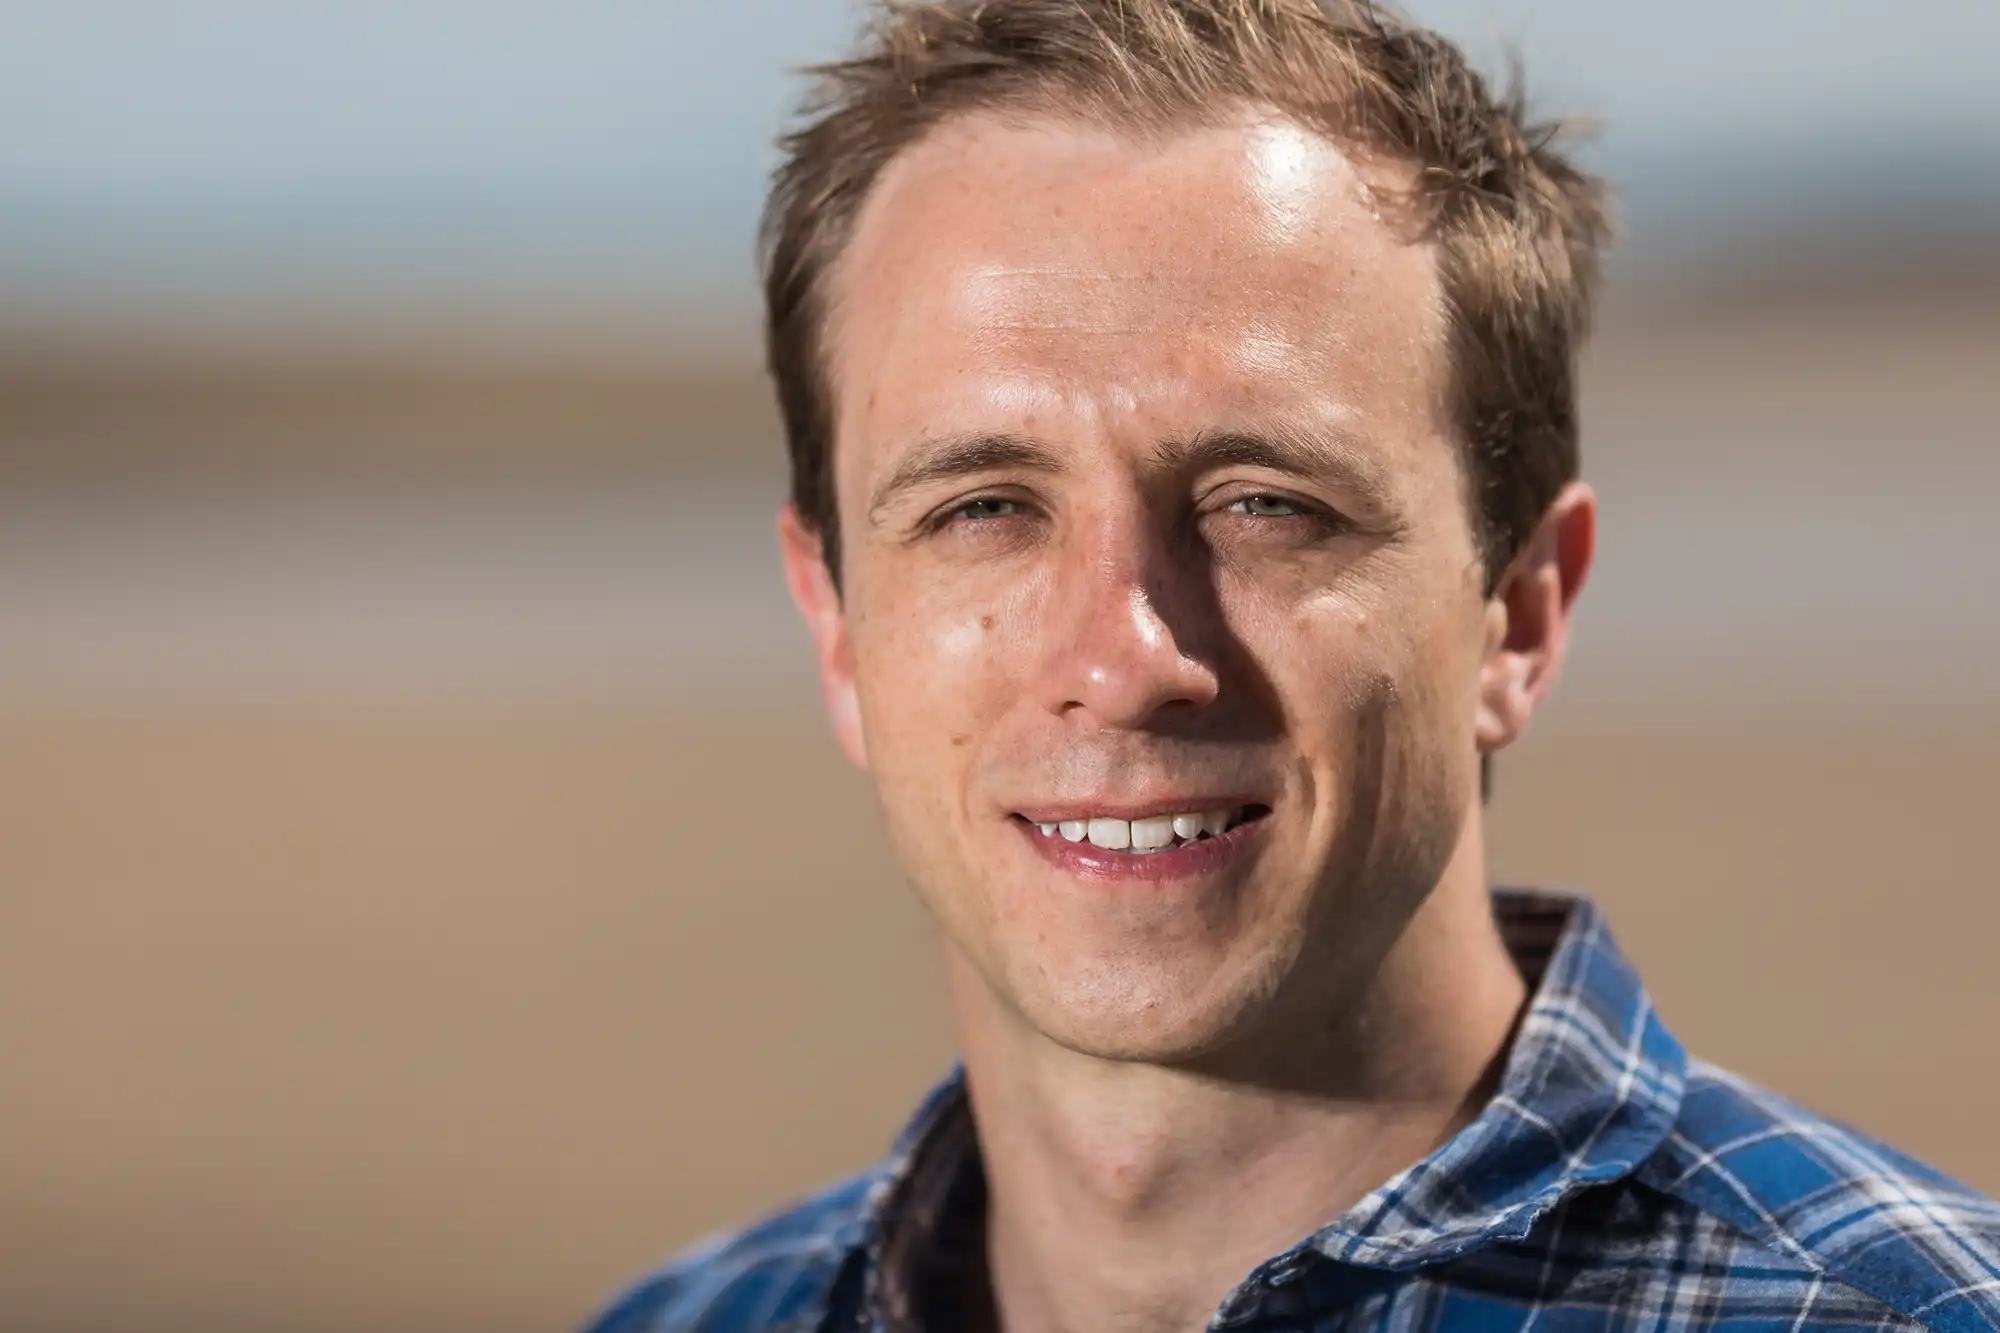 A smiling man in a plaid shirt standing on a sandy beach with a blurred background.